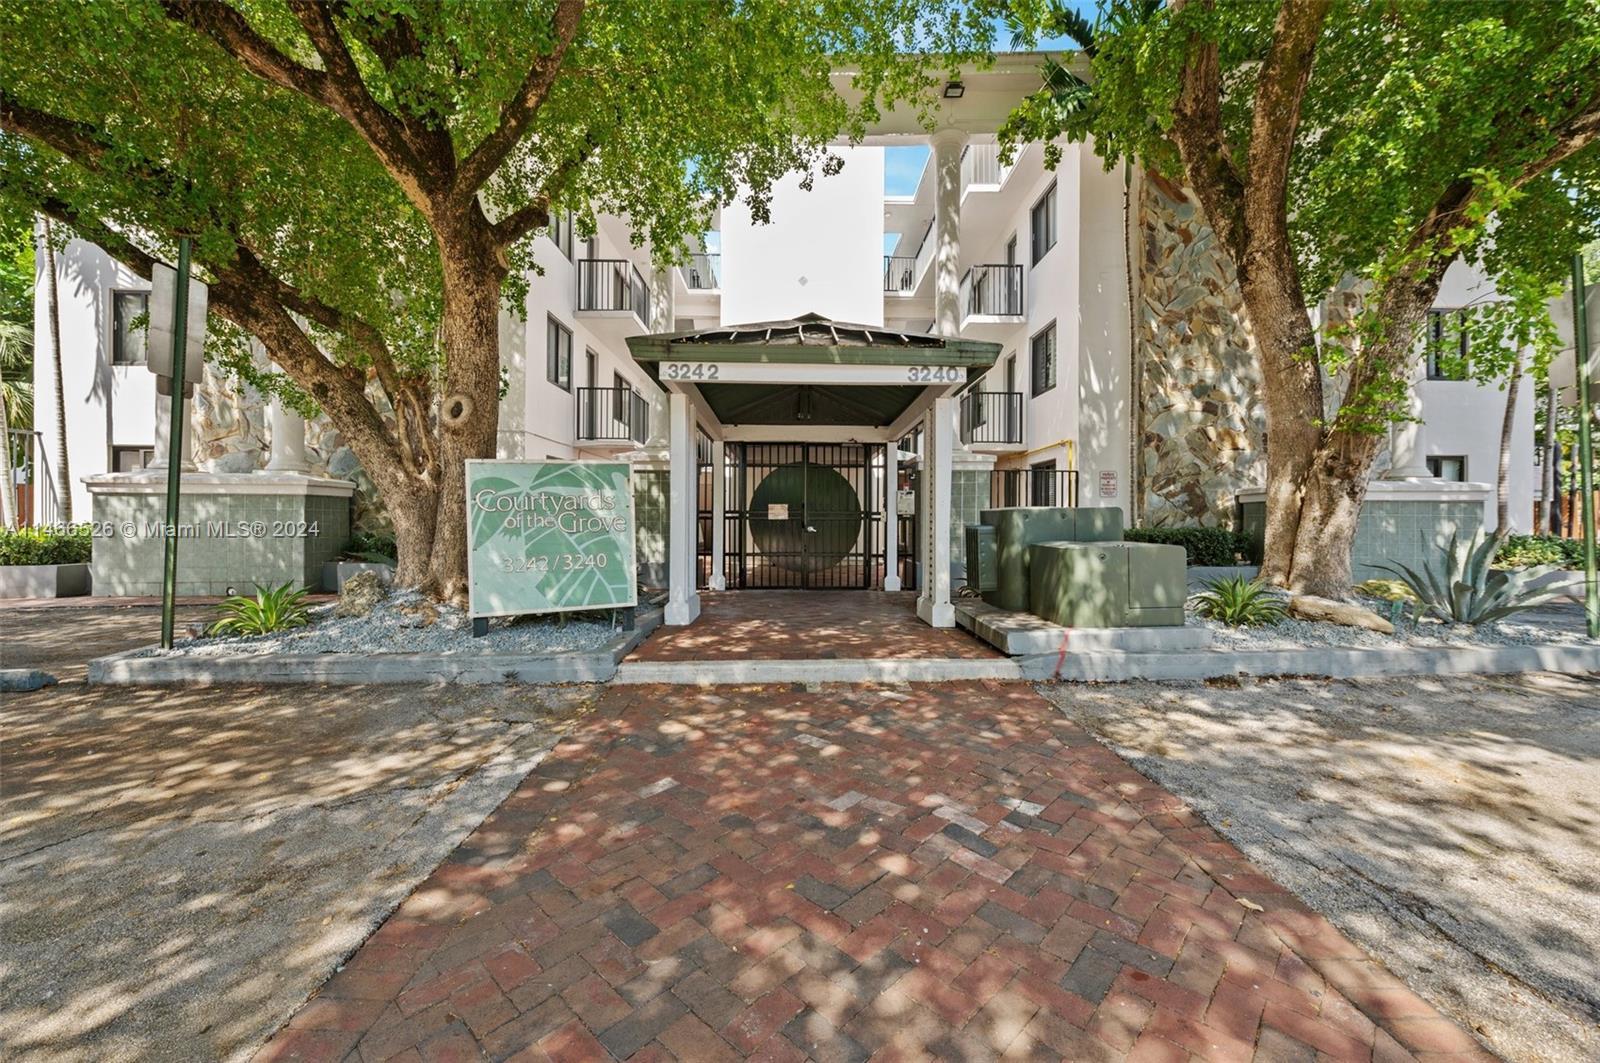 Welcome to this charming 1-bedroom, 1-bathroom condo nestled in the vibrant heart of Coconut Grove. 